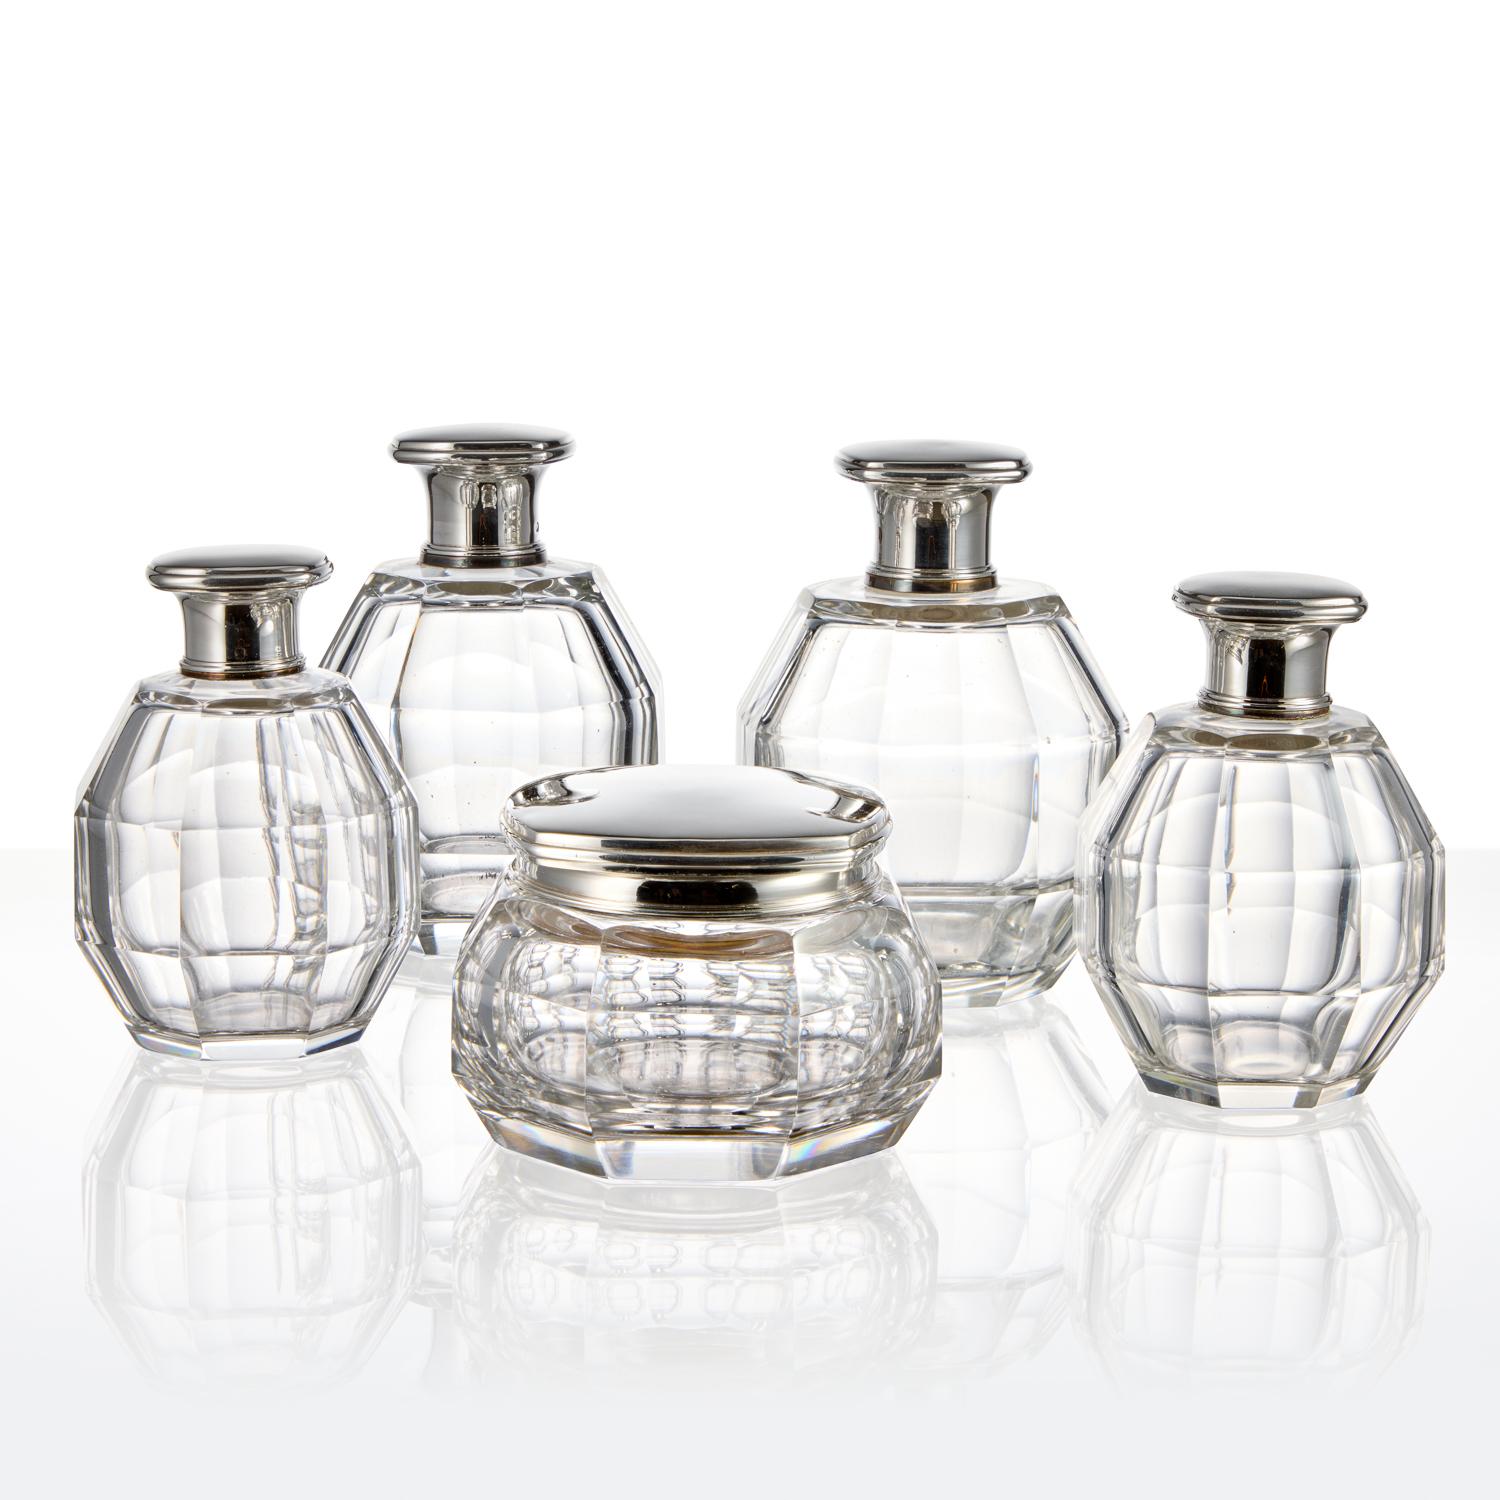 French 20th Century Set of Silver Art Deco Perfume Bottles France Circa 1920 For Sale